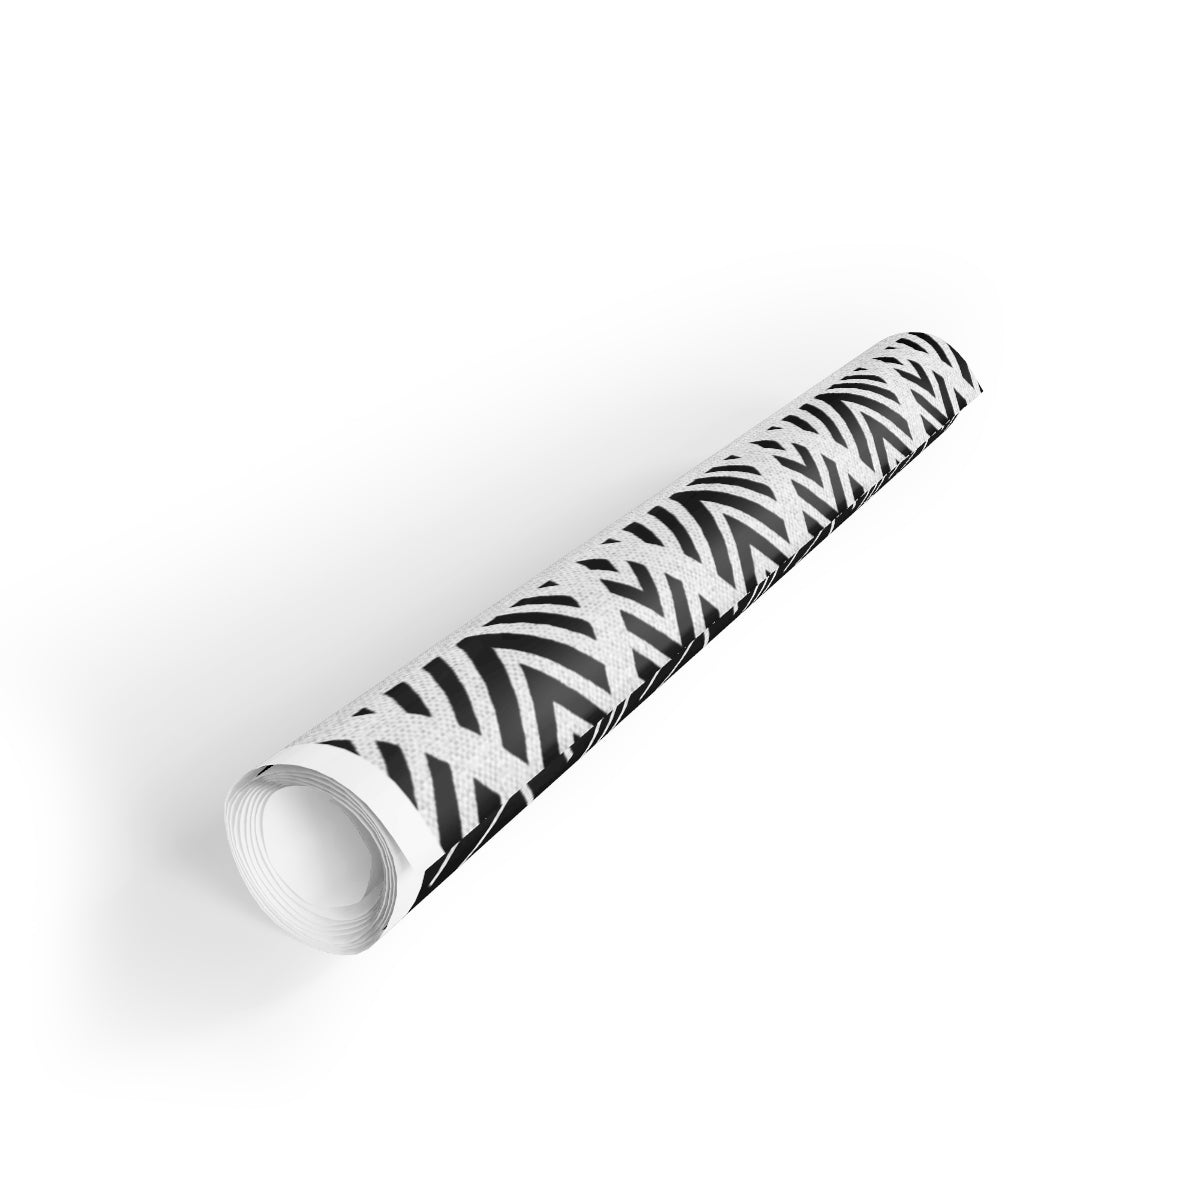 White and Black Mudcloth Wrapping Paper (79' /29')